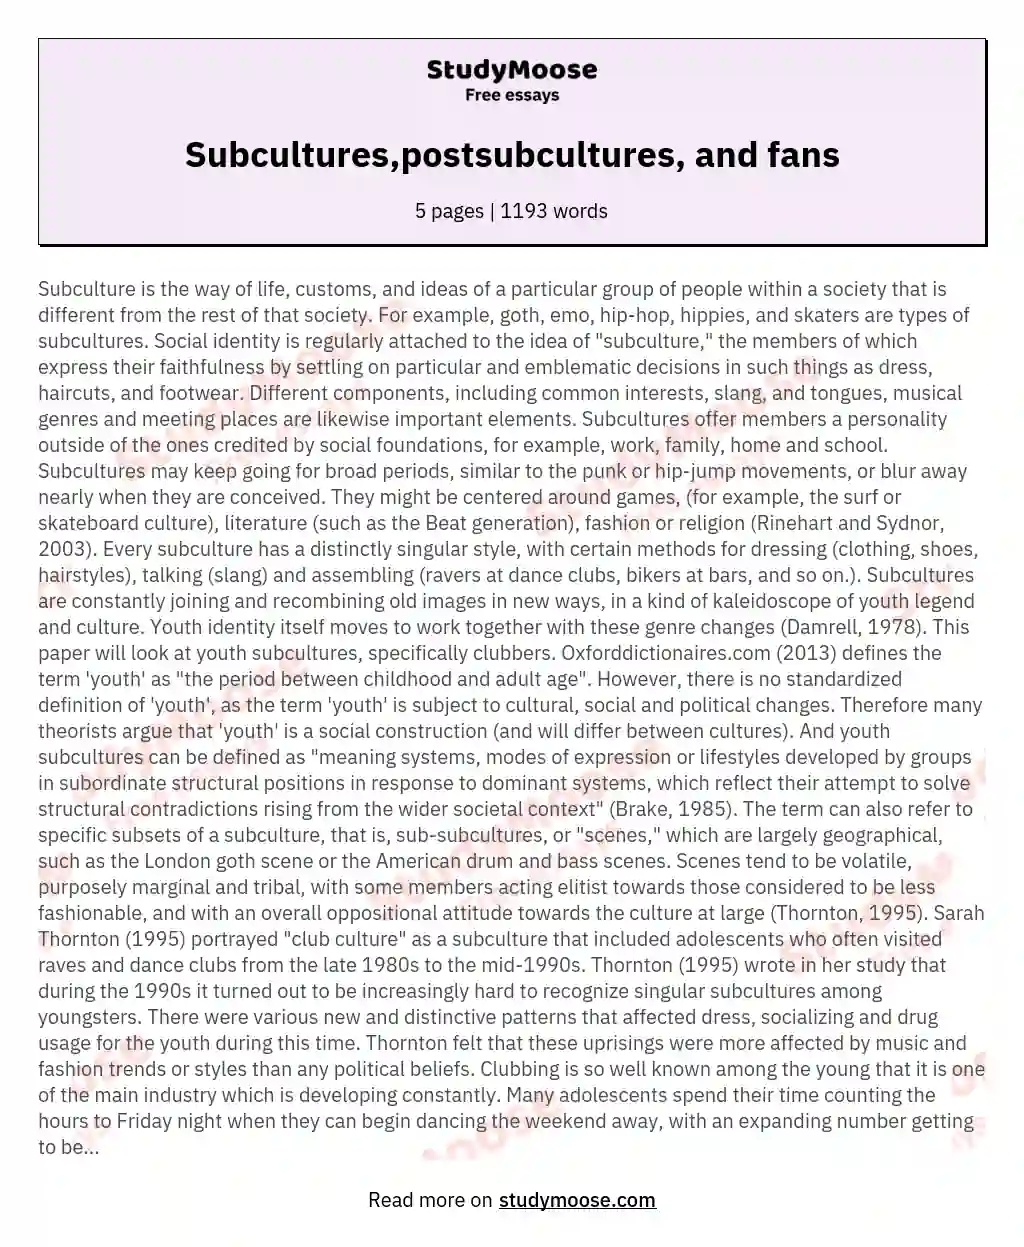 Subcultures,postsubcultures, and fans essay